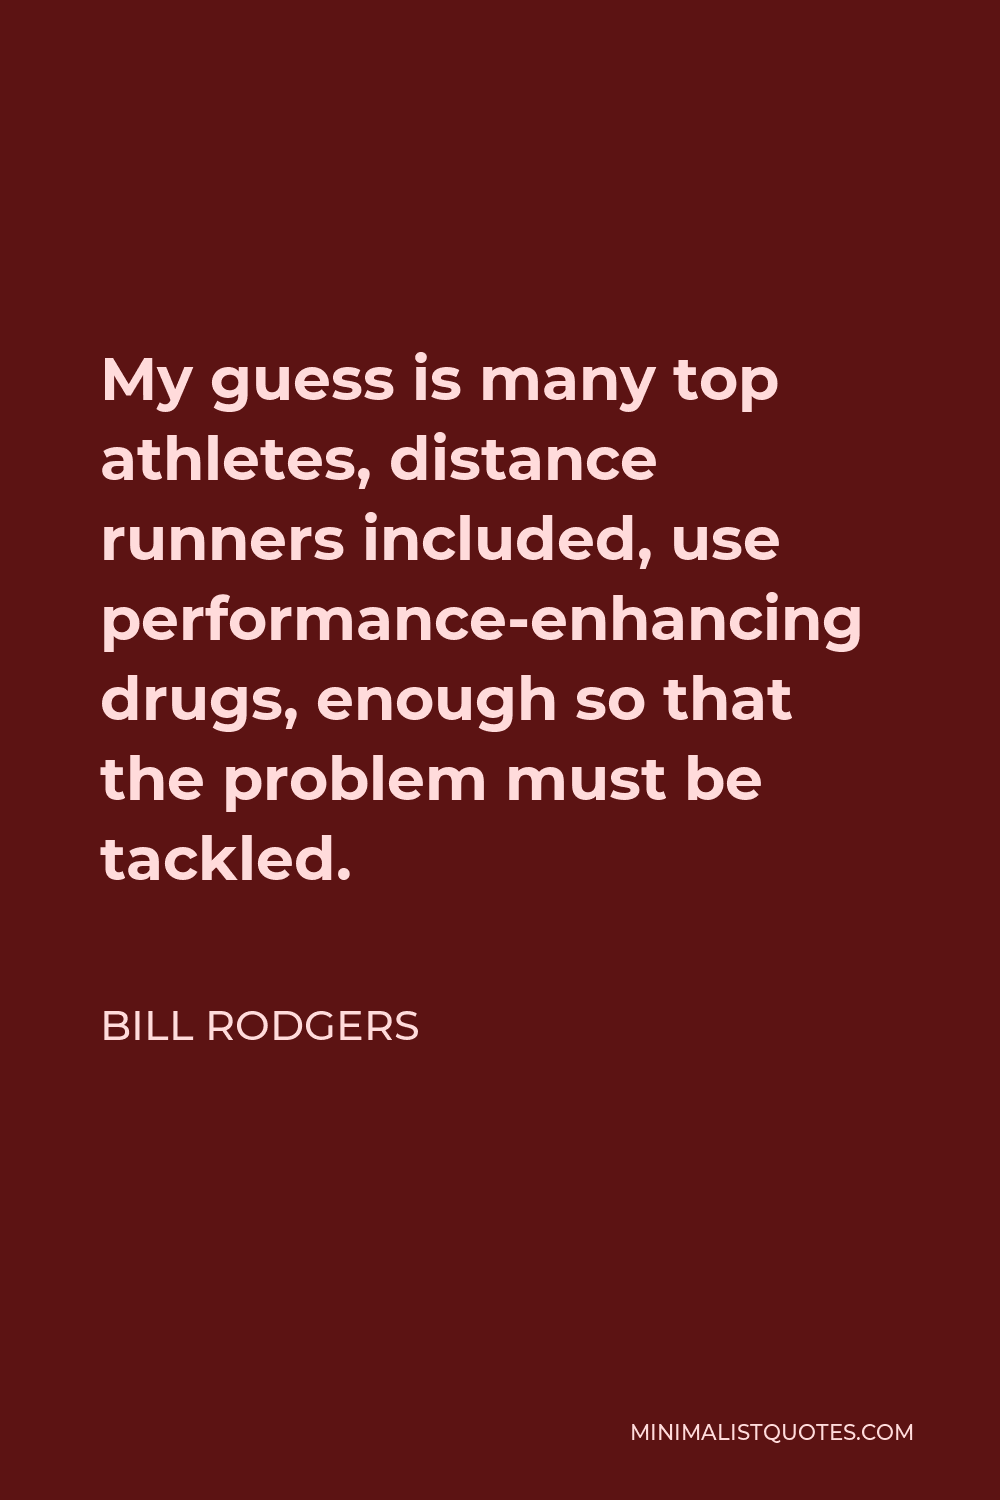 Bill Rodgers Quote - My guess is many top athletes, distance runners included, use performance-enhancing drugs, enough so that the problem must be tackled.